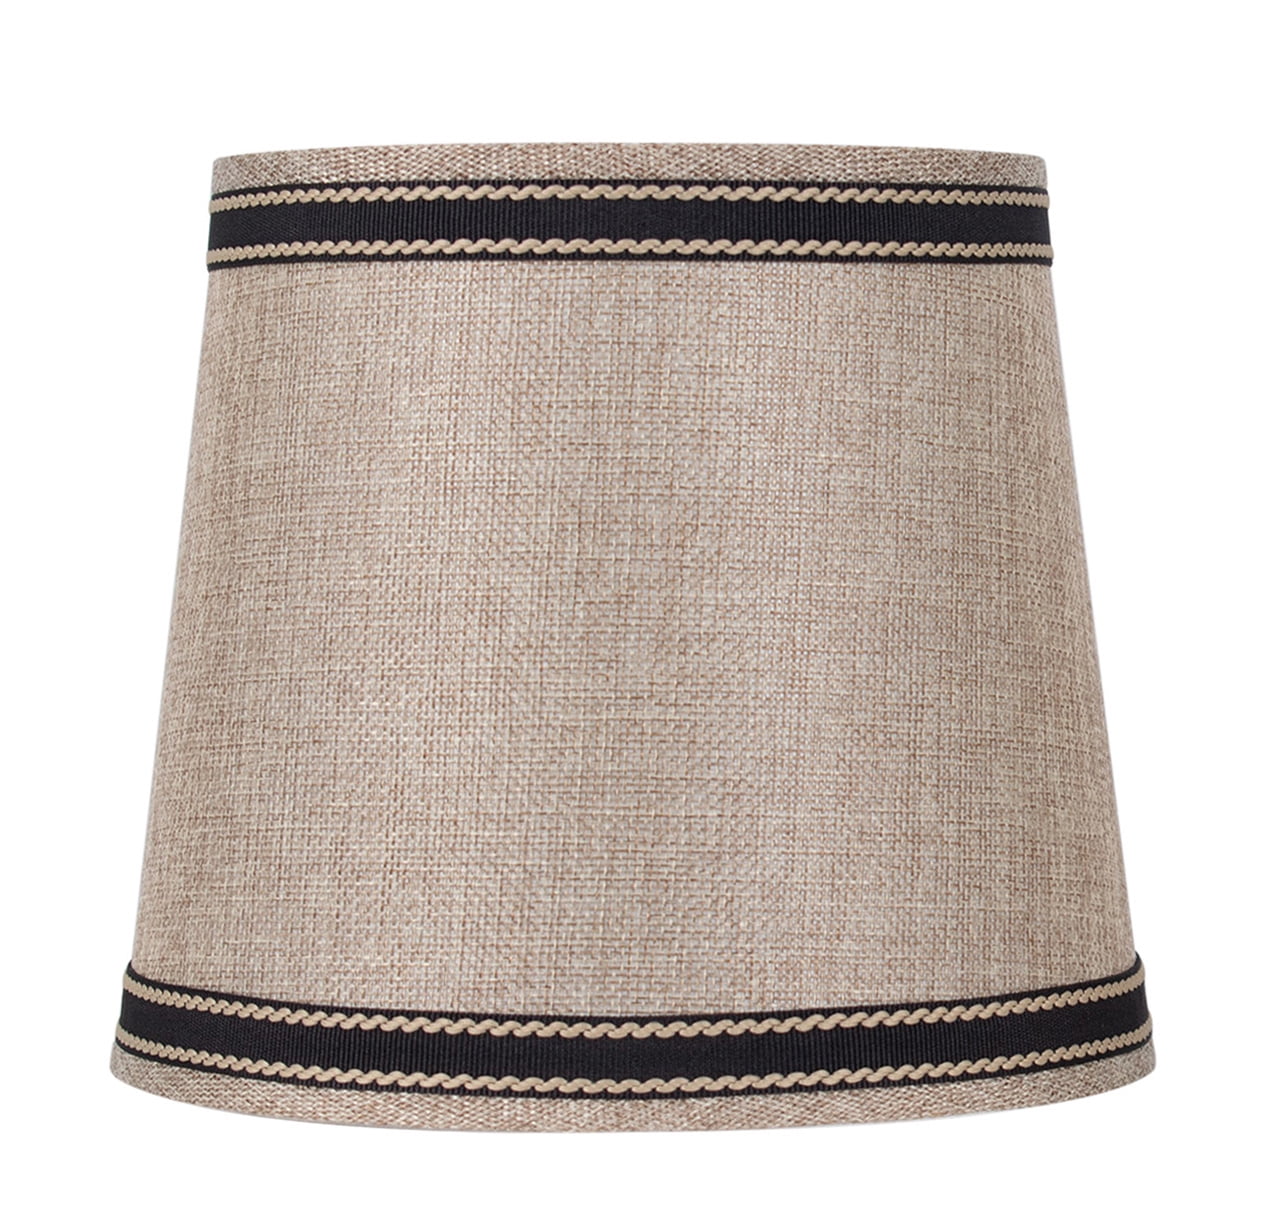 Mainstays Brown with Black Trim Empire Accent Lamp Shade, 6" W x 7.5" D x 6.5" H